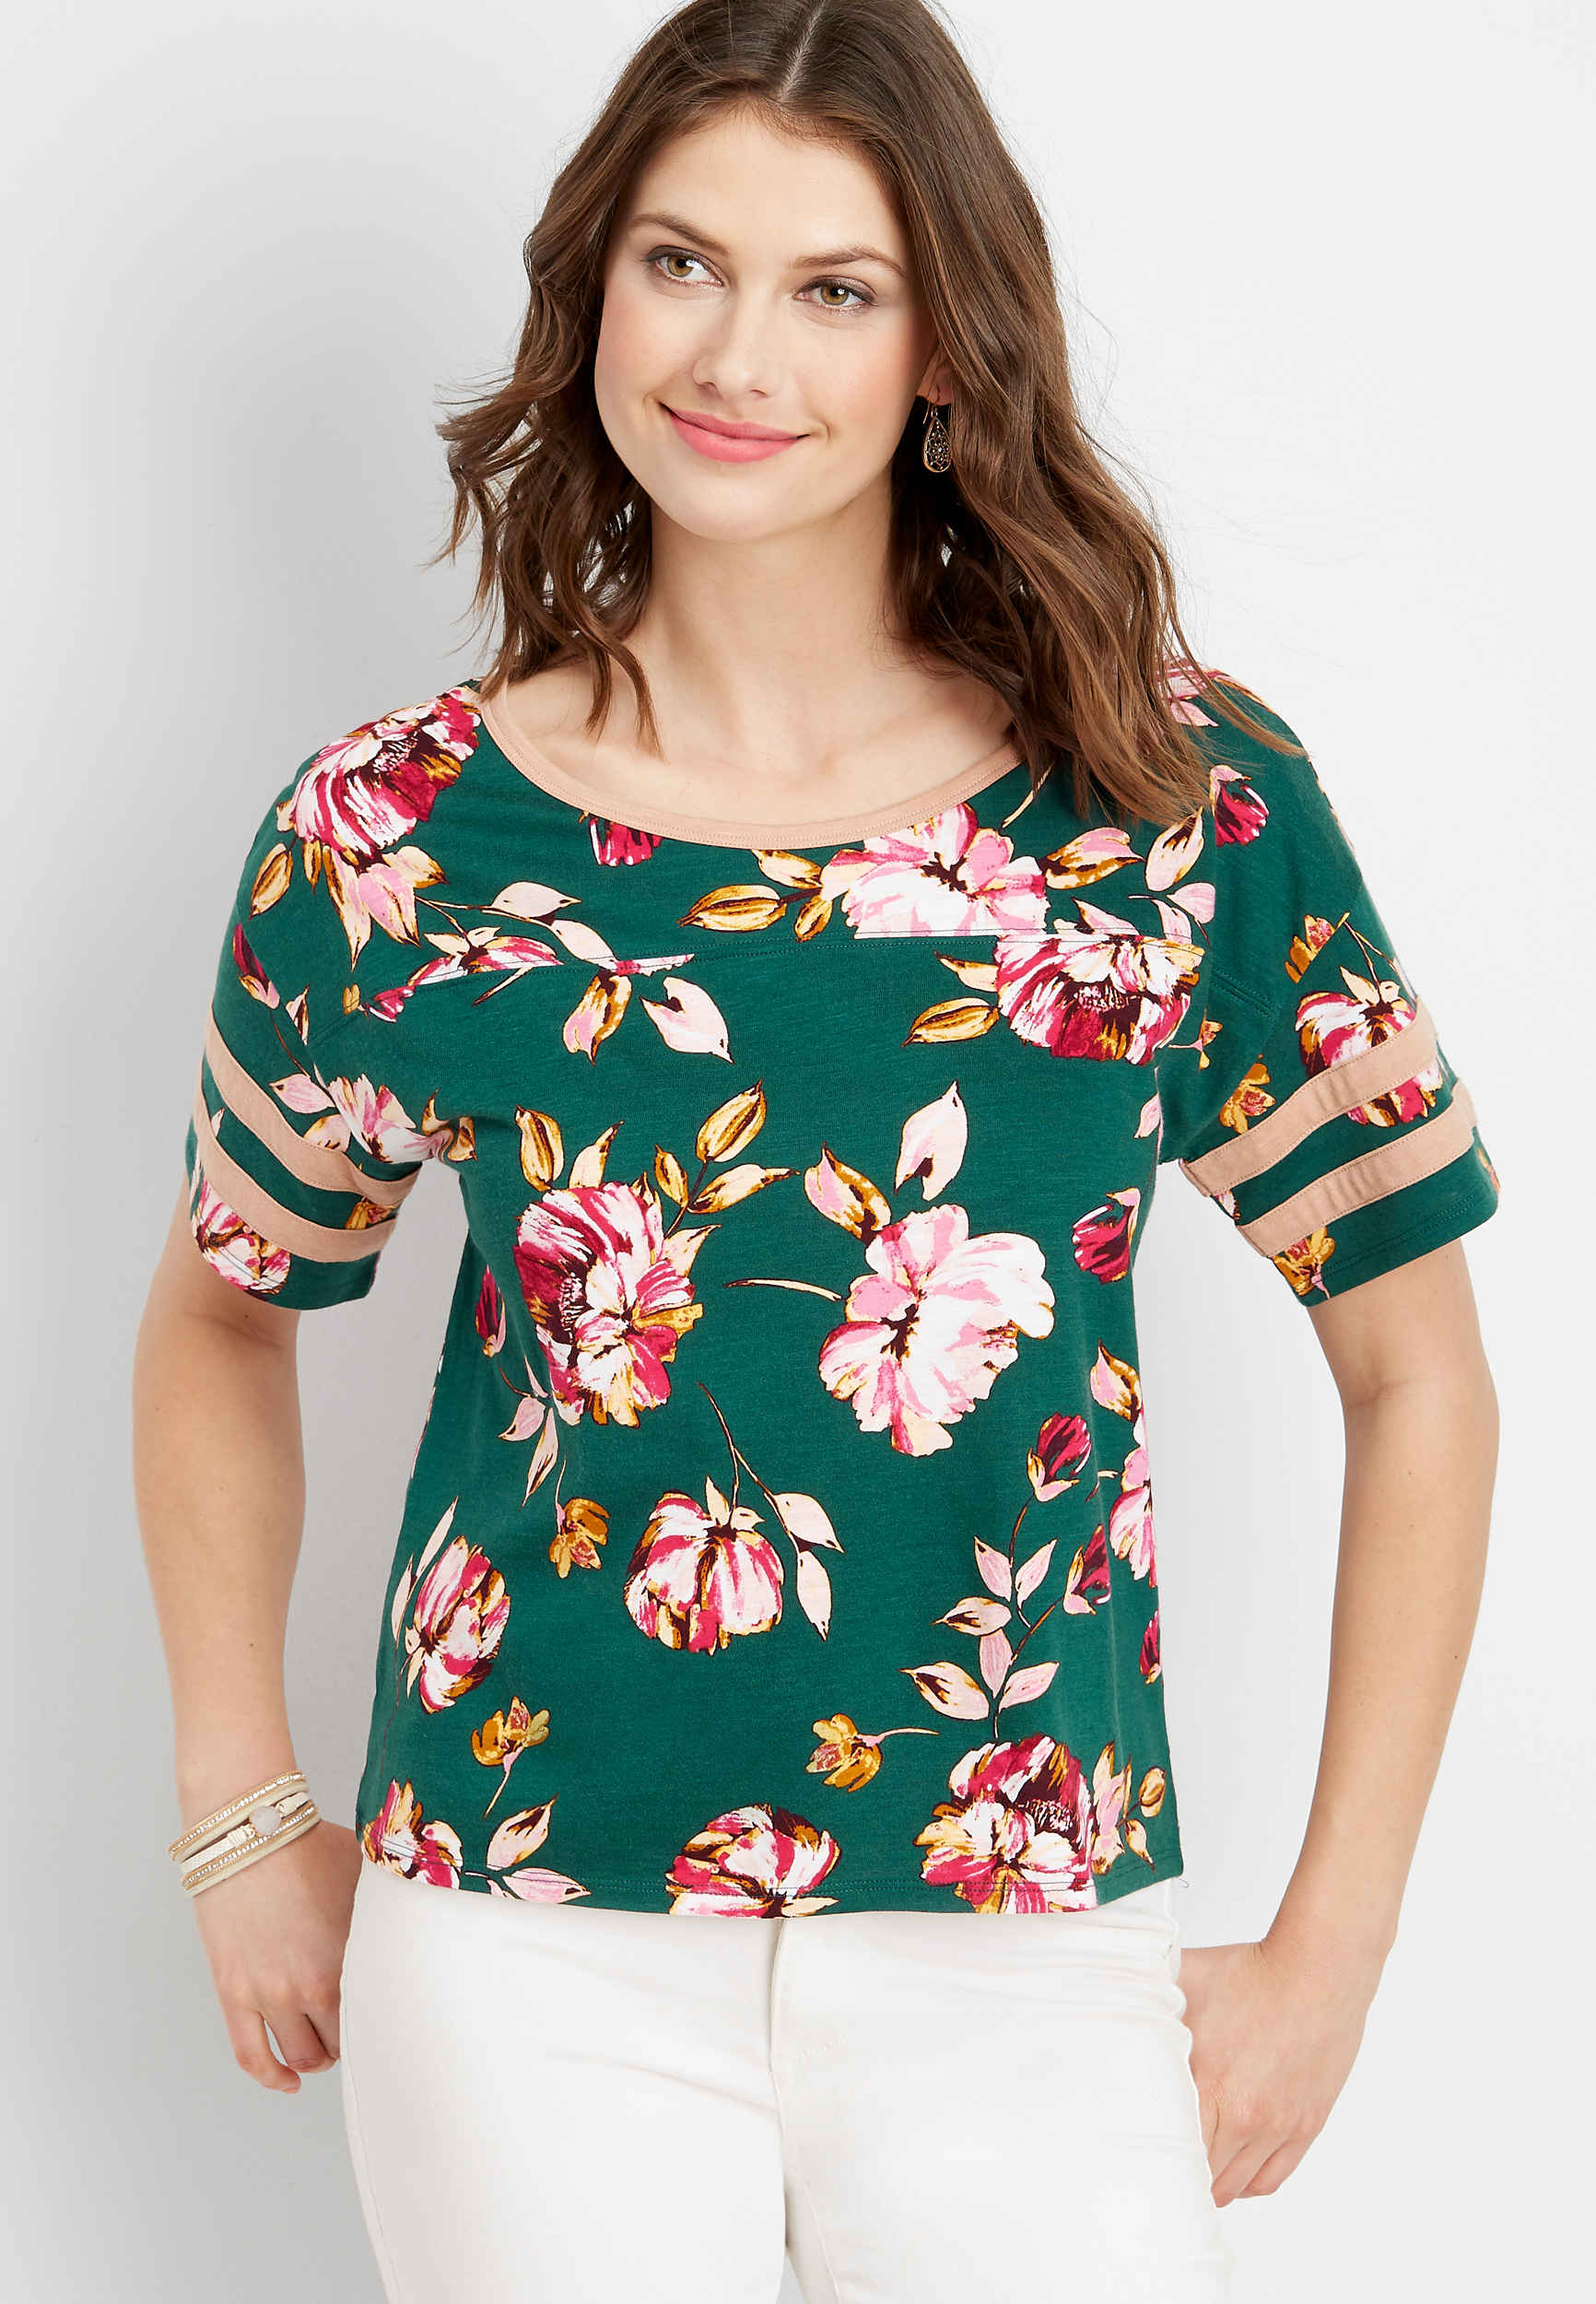 Fashion Tops For Women | maurices